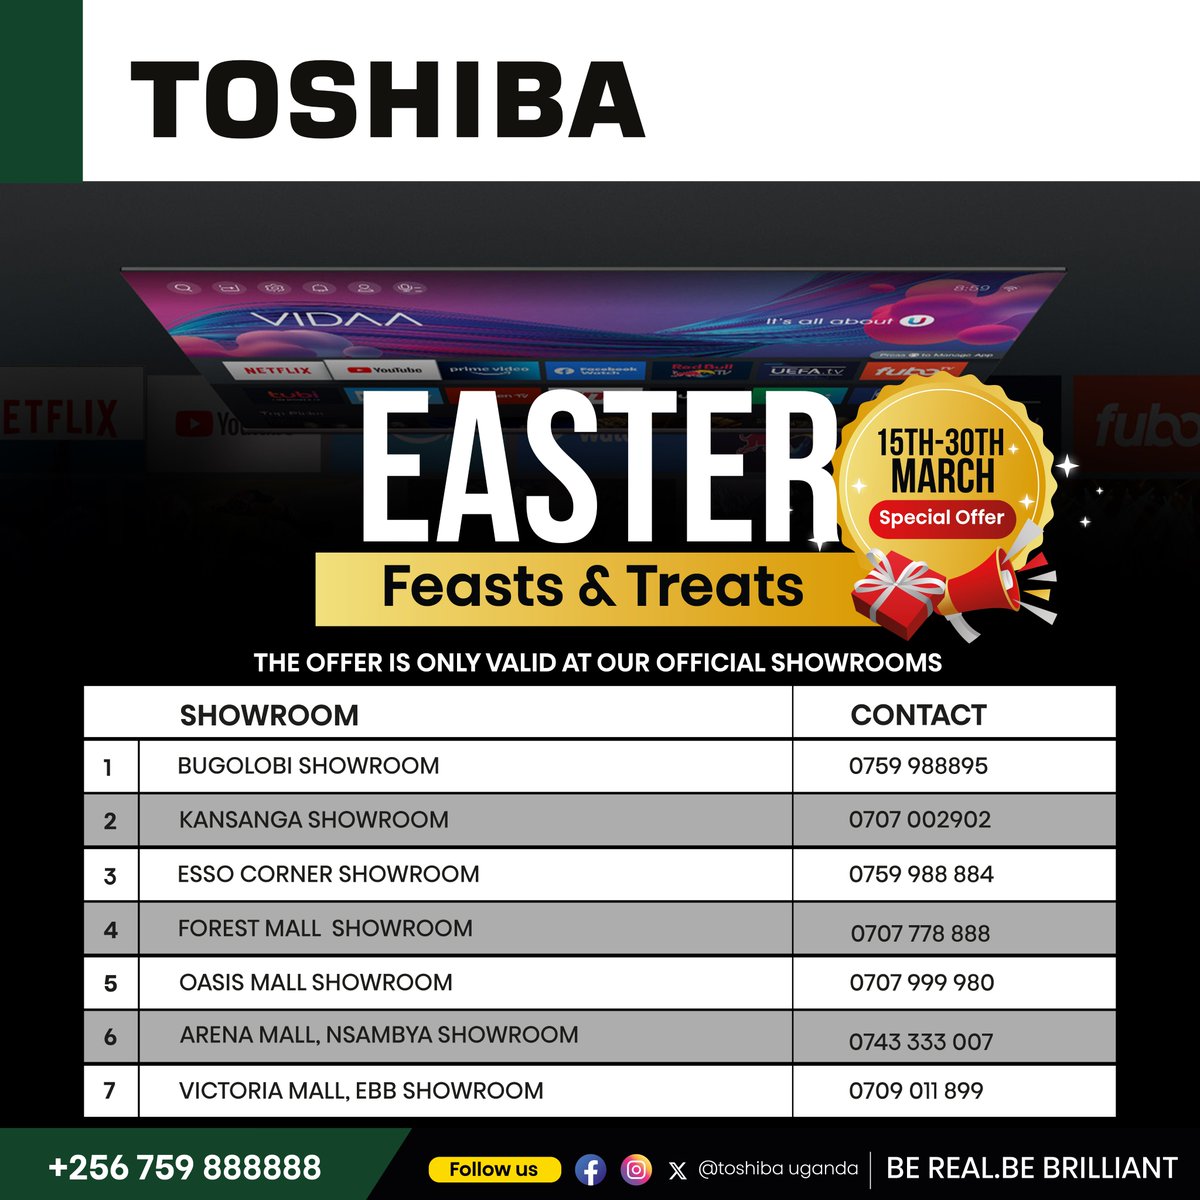 Dont forget to update your to do list this week as the best TV discounts are still running. 
Move through to any of these showrooms and grab your self one as stock still lasts.
For more info 0759 888 888
#toshibatvug #EasterSavings #Feastsandtreats